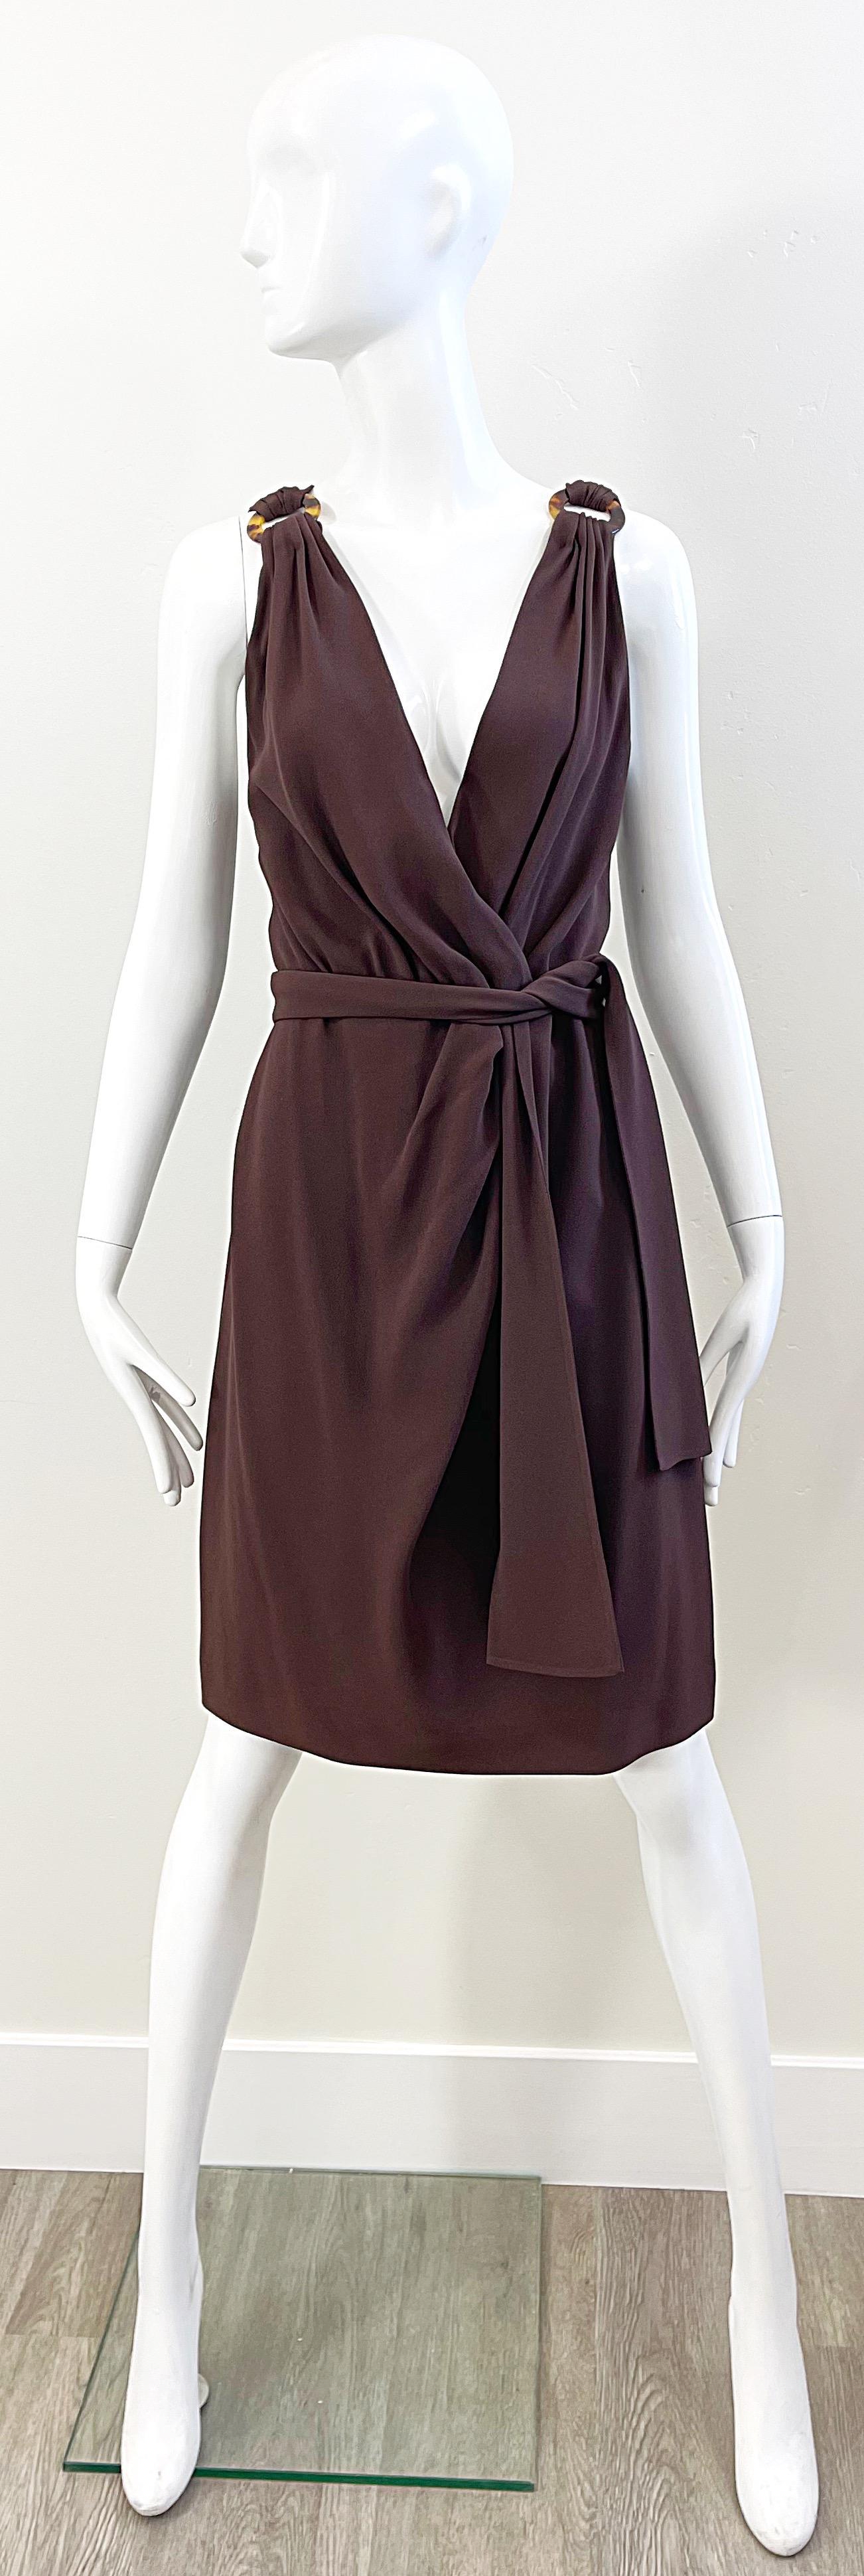 Sexy 1990s YVES SAINT LAURENT Rive Gauche chocolate brown plunging dress and sash belt ! Features faux tortoise shell rings at each shoulder. Wrap style with hidden hook-and-eye closures and snap. Soft rayon blend fabric drapes beautifully against